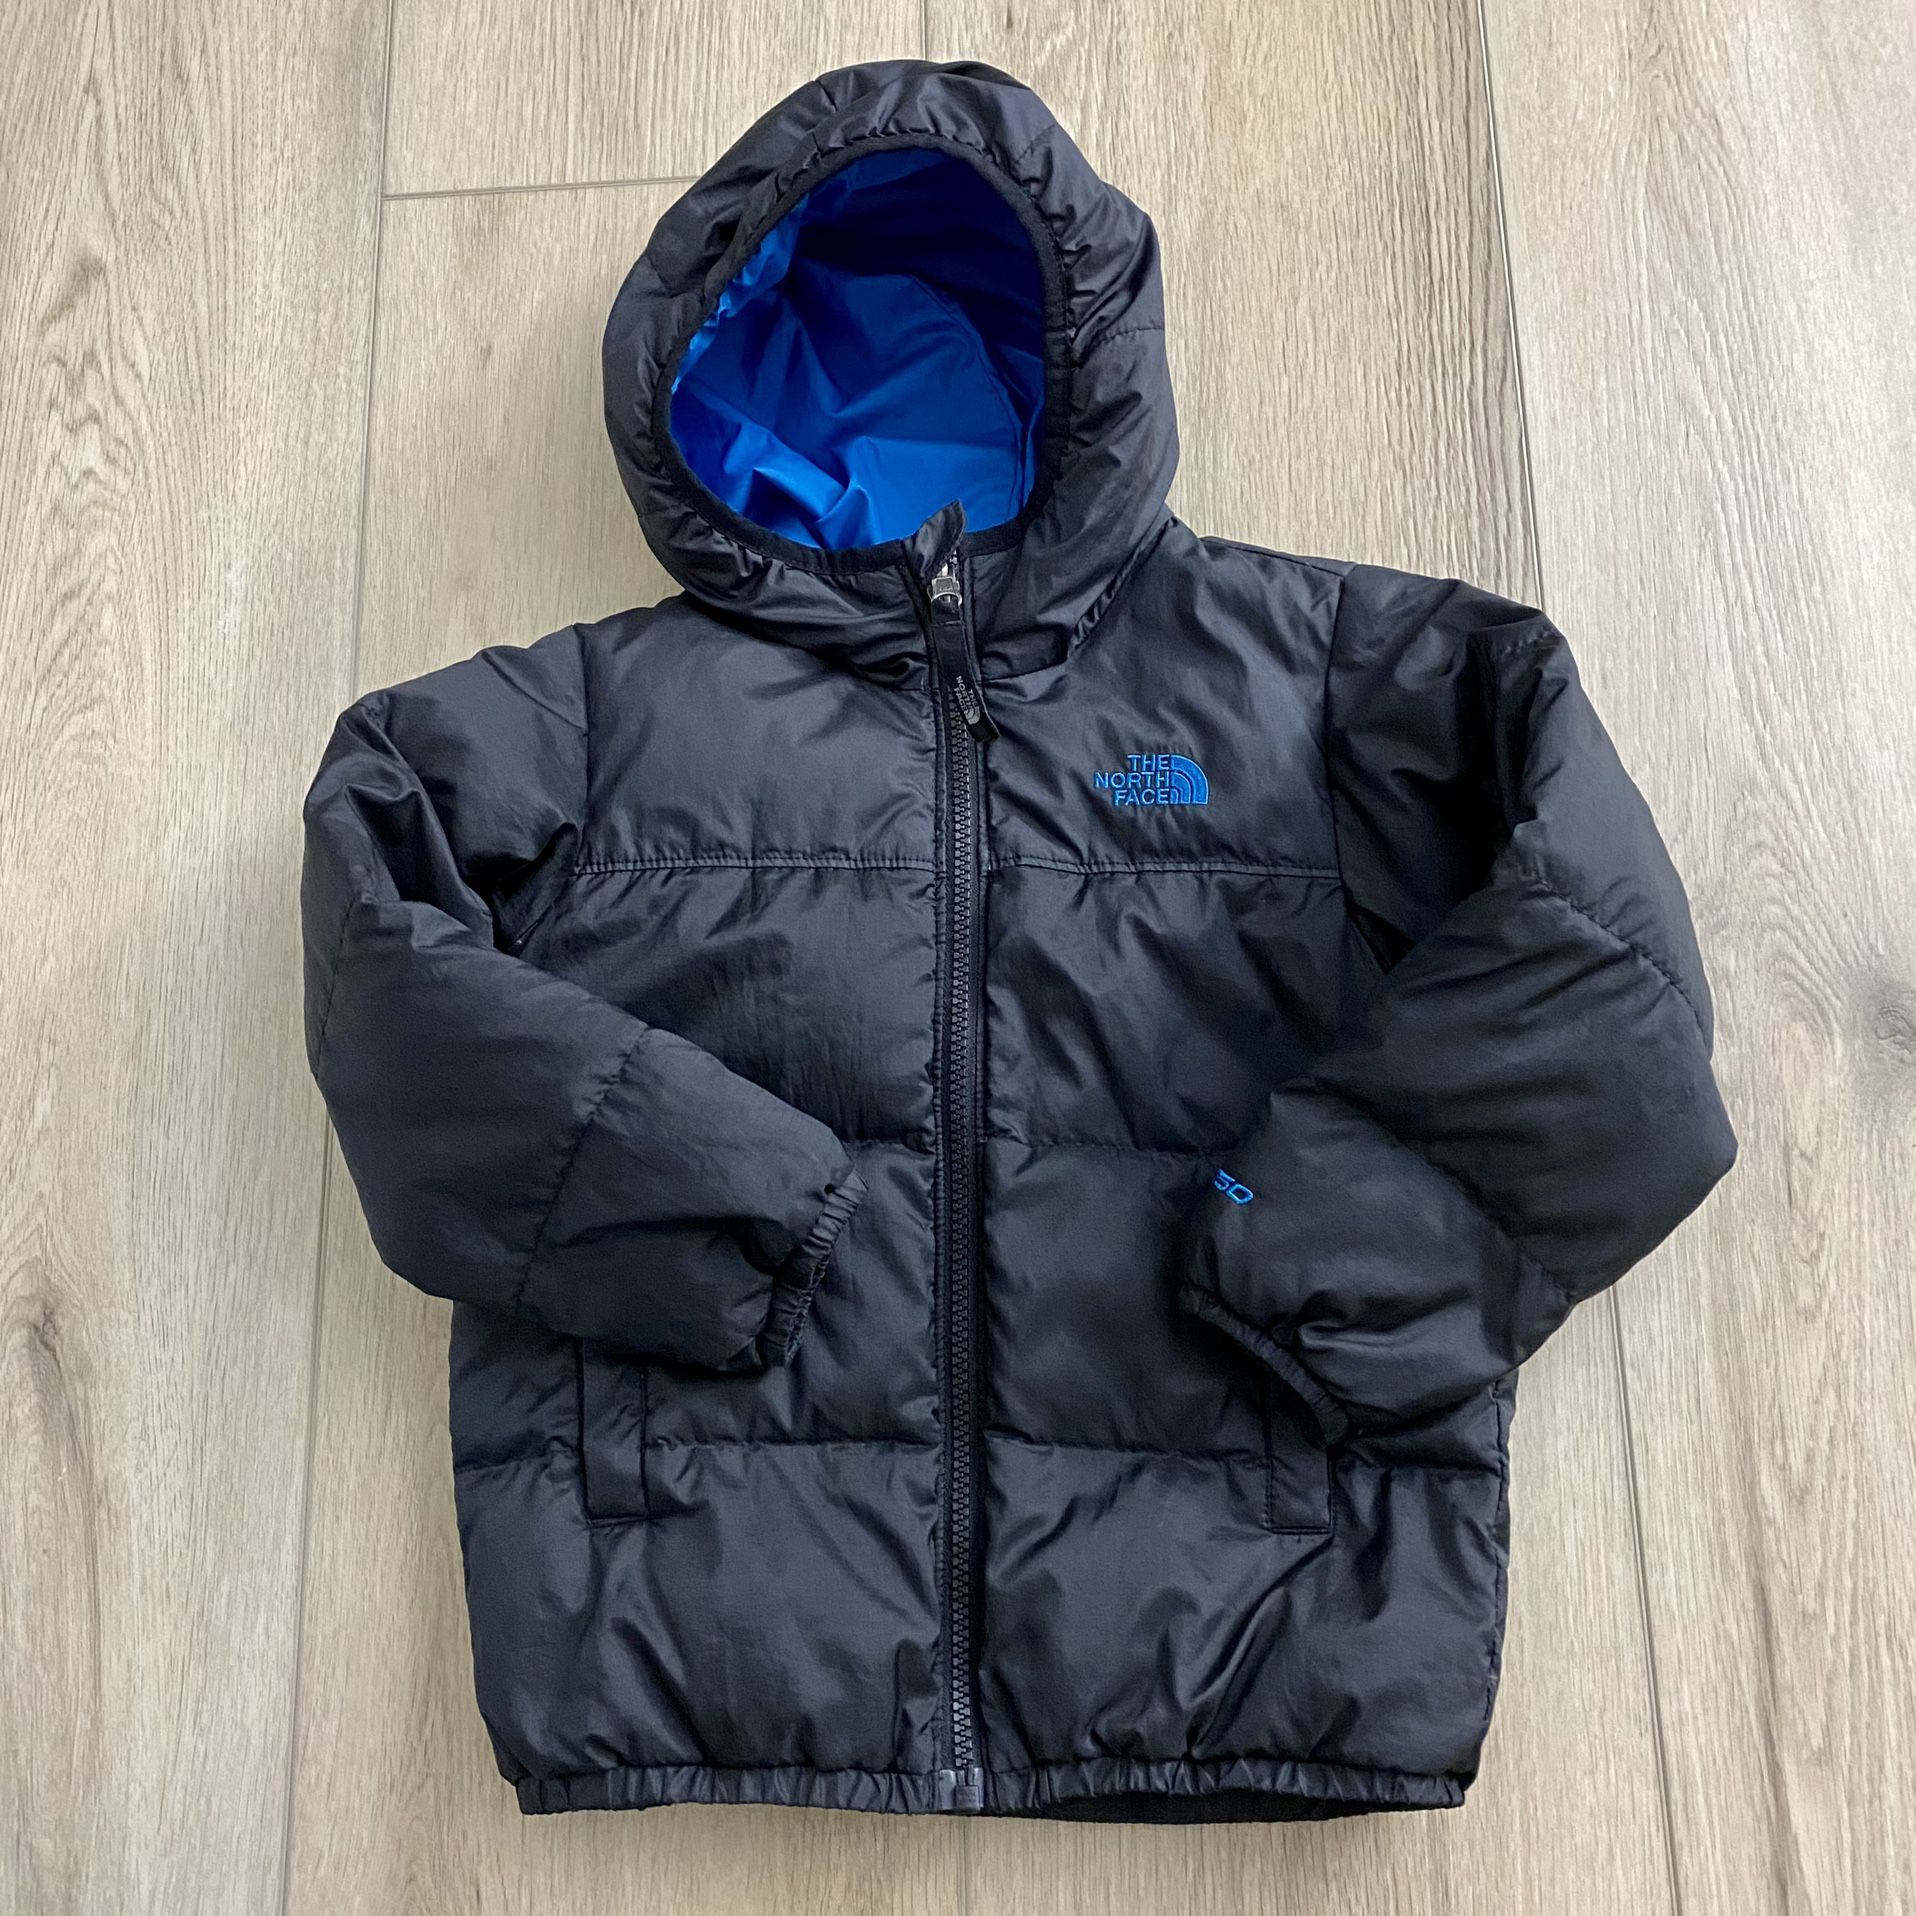 The North Face Jacket Boys Kids 4T